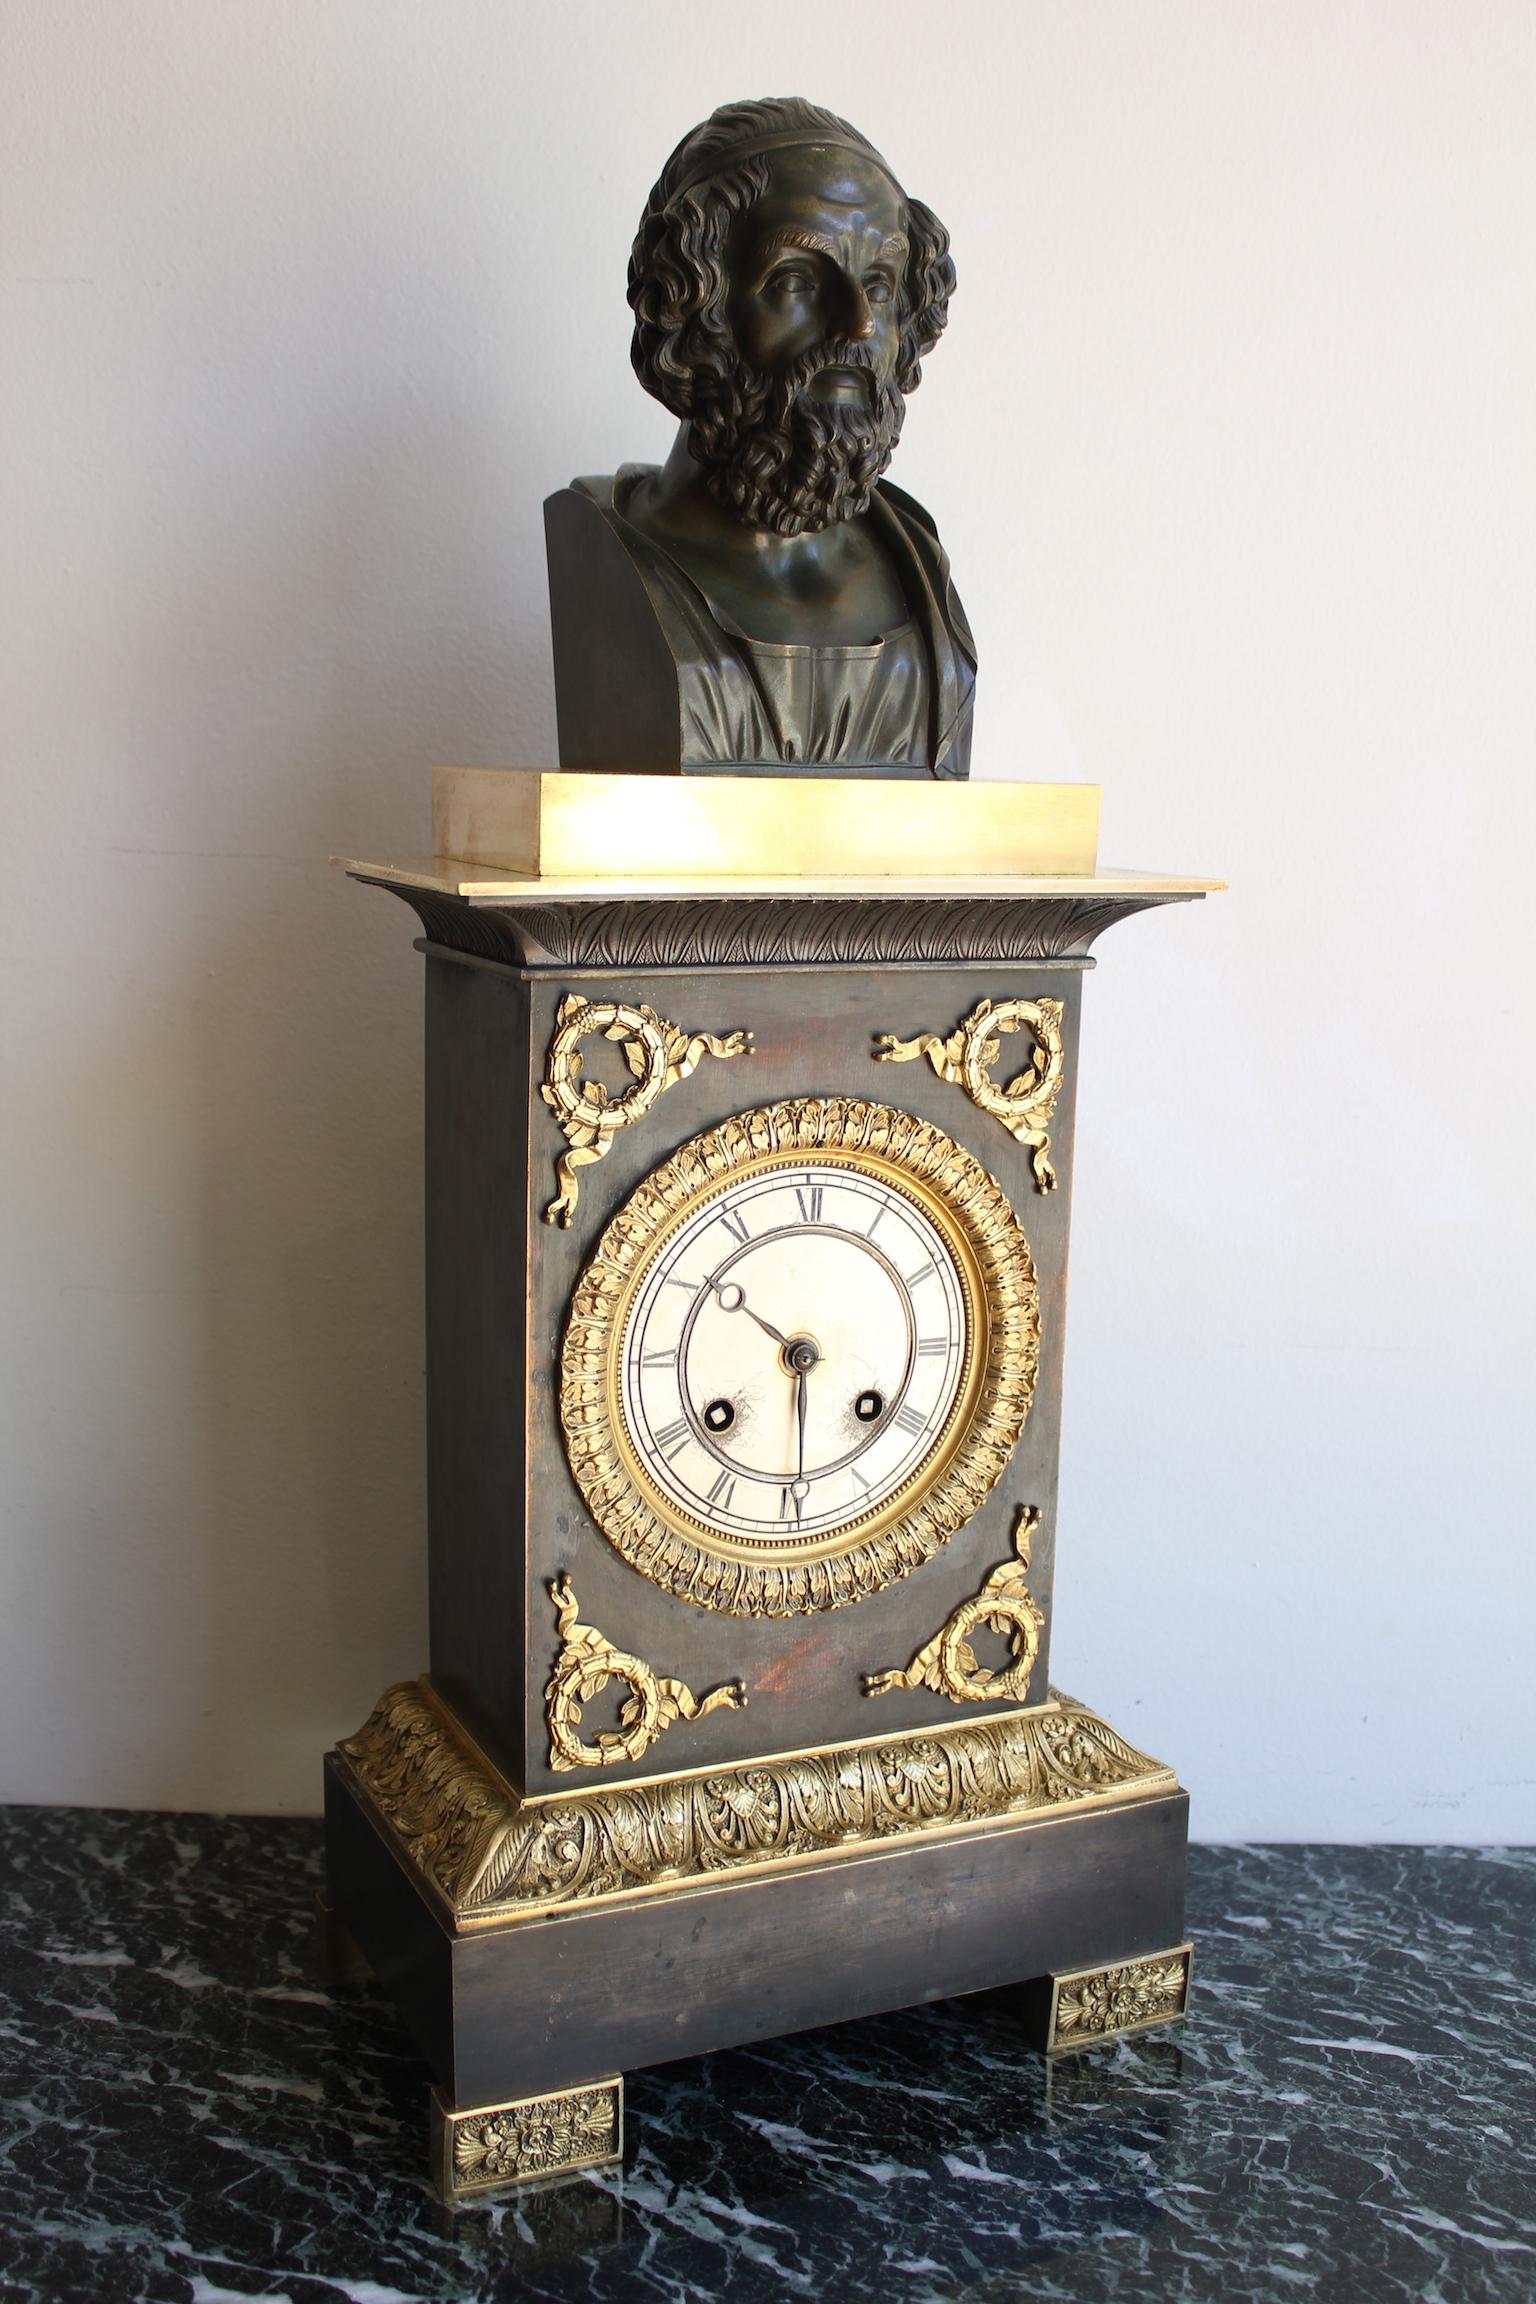 French restauration clock, surmounted by a bust of Homer.
Good condition.
Dimensions: Height 55cm, width 22cm, depth 13cm.